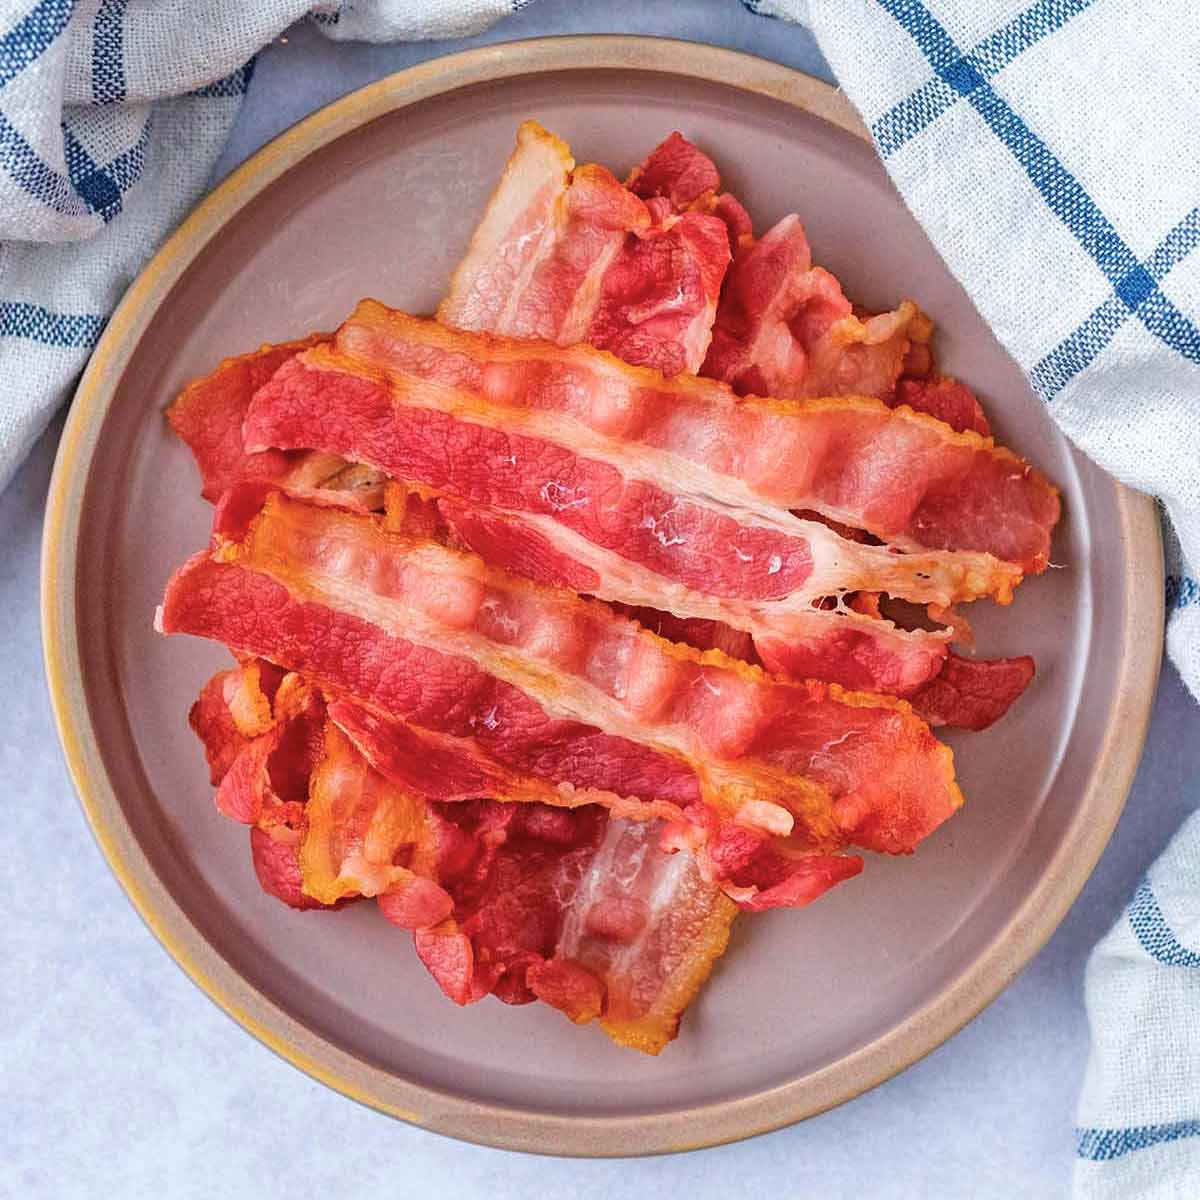 https://hungryhealthyhappy.com/wp-content/uploads/2022/01/Microwave-Bacon-featured.jpg